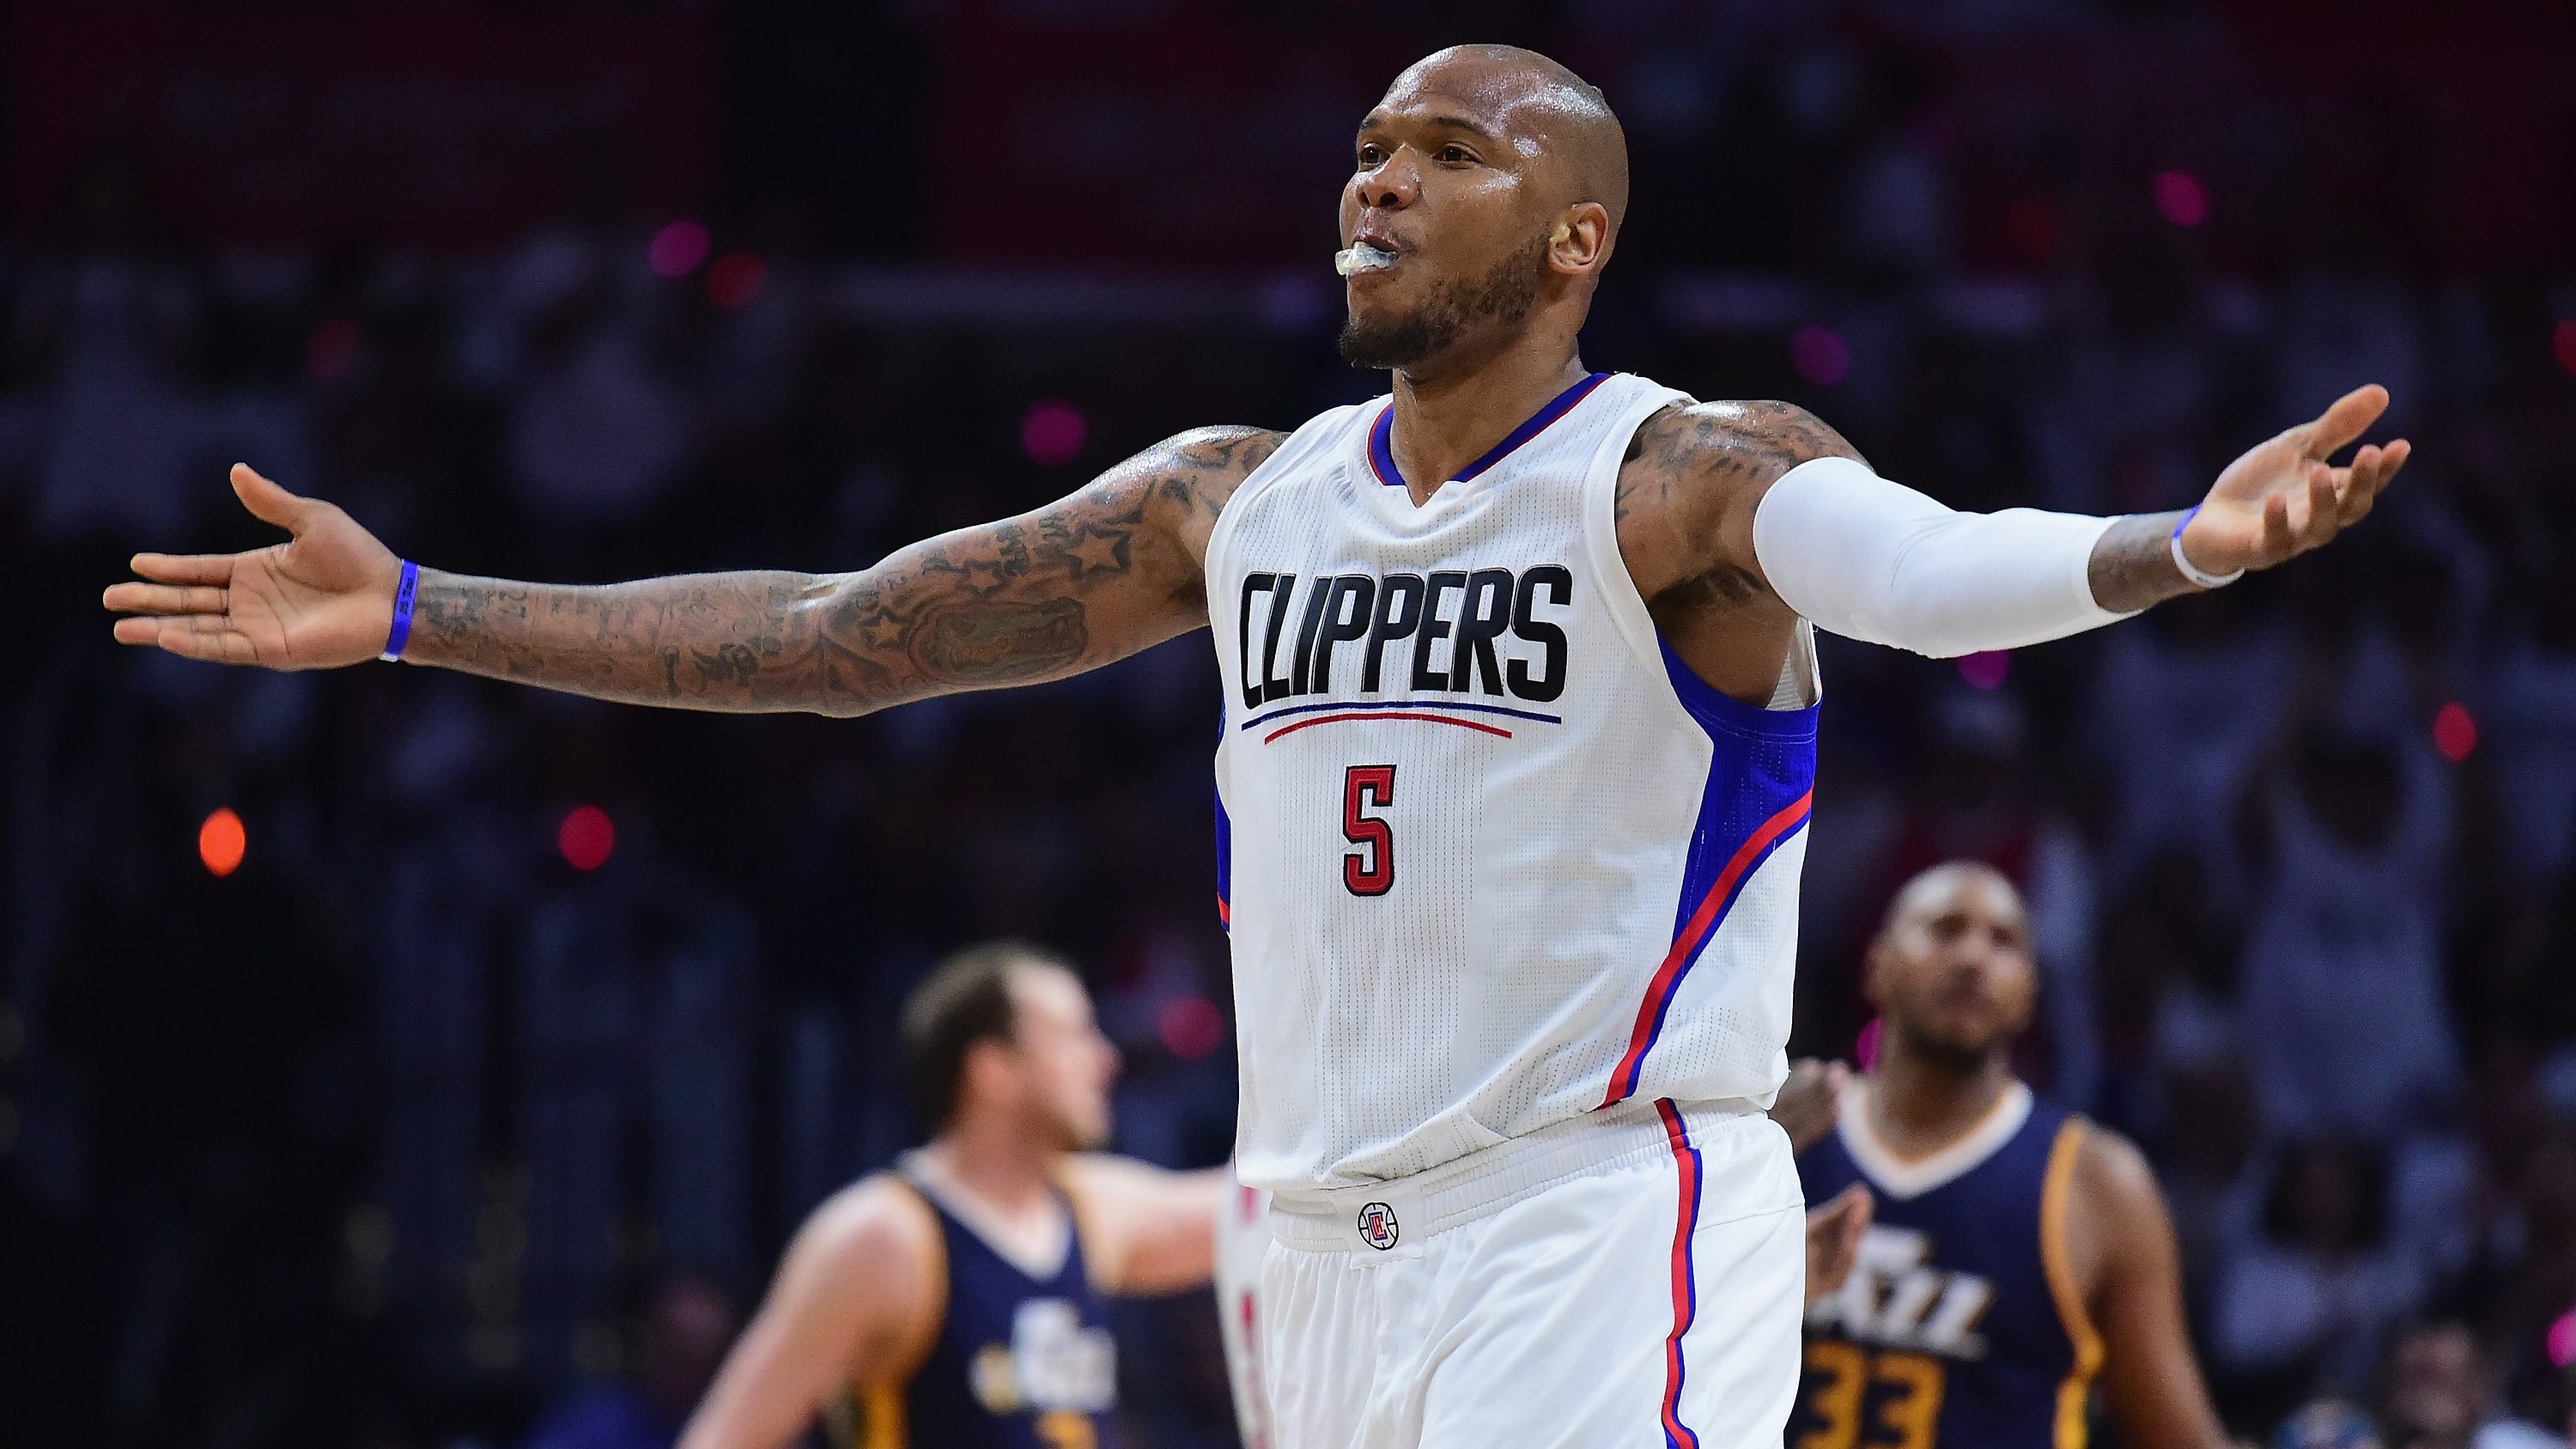 Marreese Speights Lakers